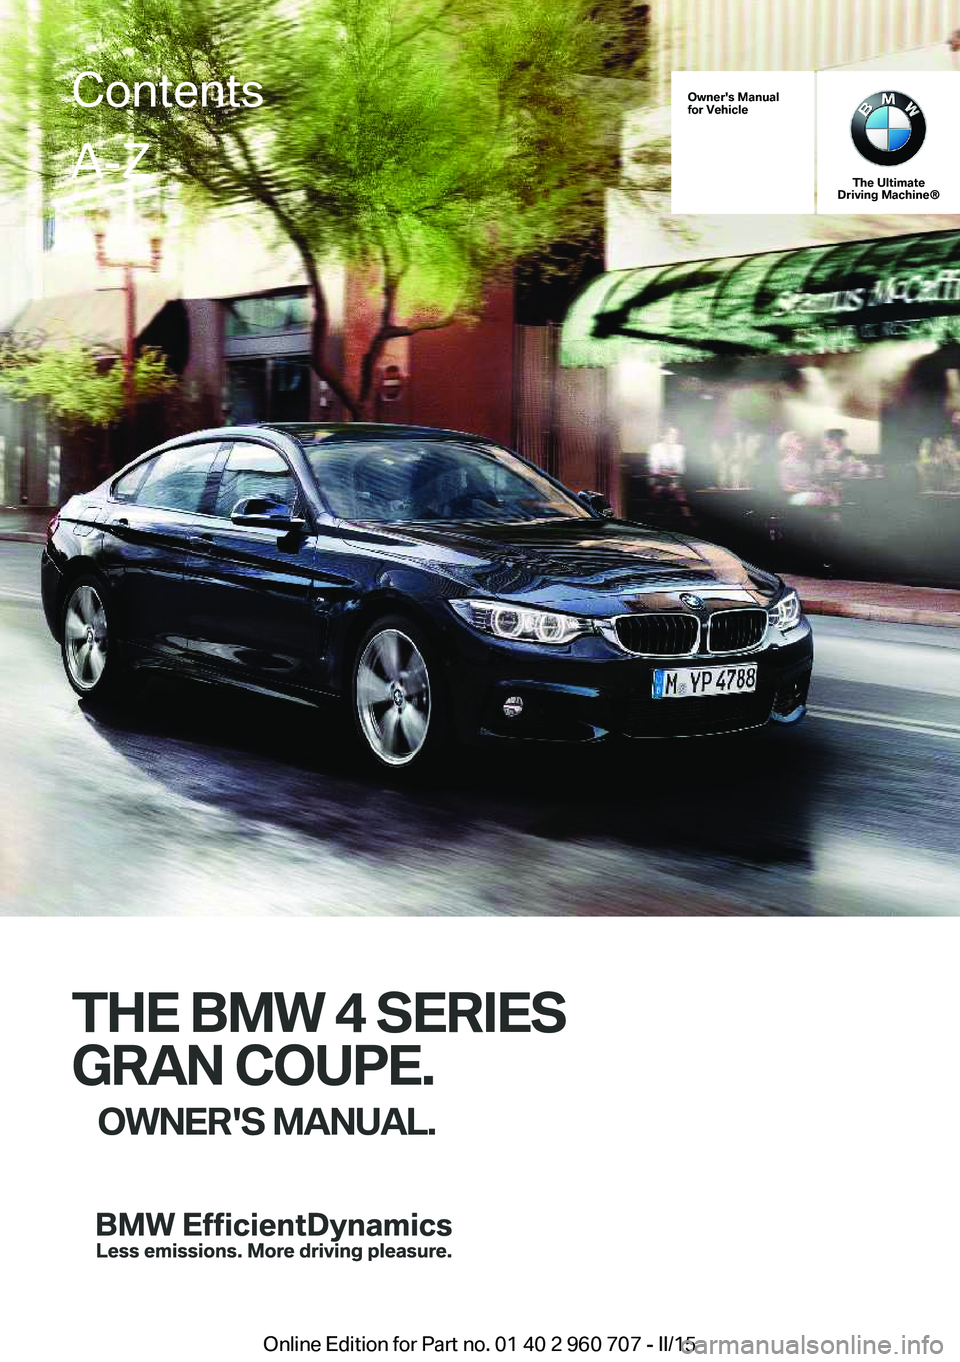 BMW 435I GRAN COUPE 2015  Owners Manual Owner's Manual
for Vehicle
The Ultimate
Driving Machine®
THE BMW 4 SERIES
GRAN COUPE. OWNER'S MANUAL.
ContentsA-Z
Online Edition for Part no. 01 40 2 960 707 - II/15   